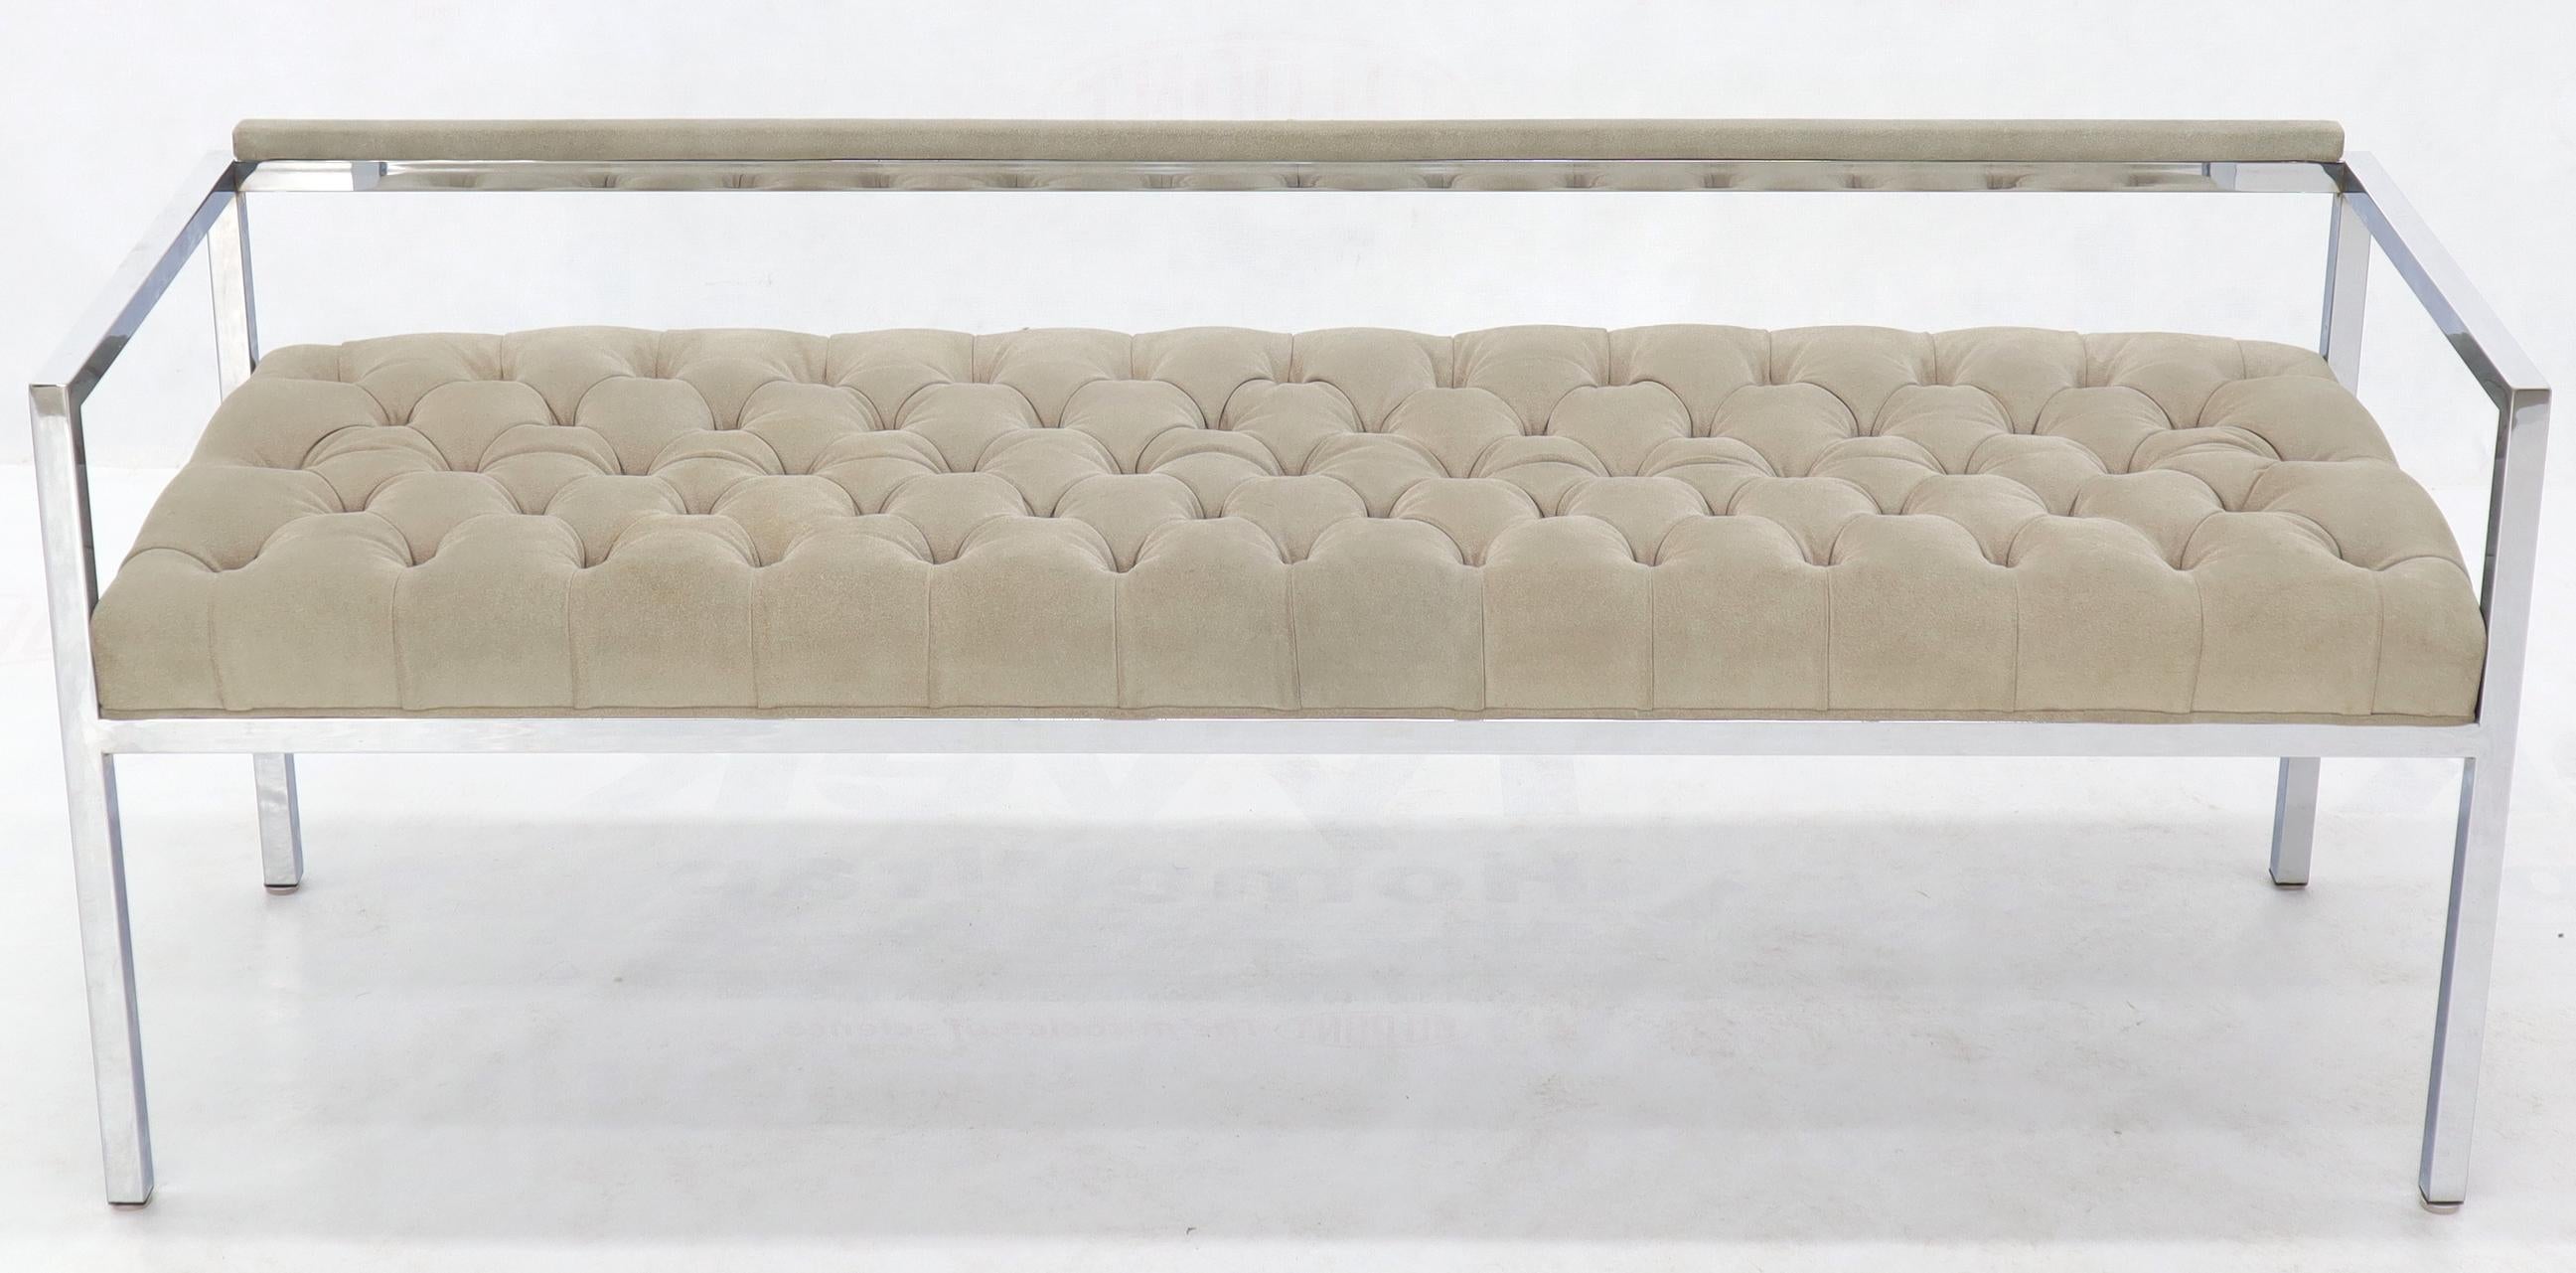 Mid-Century Modern high quality tufted suede upholstery chrome bench. Attributed to Milo Baughman.